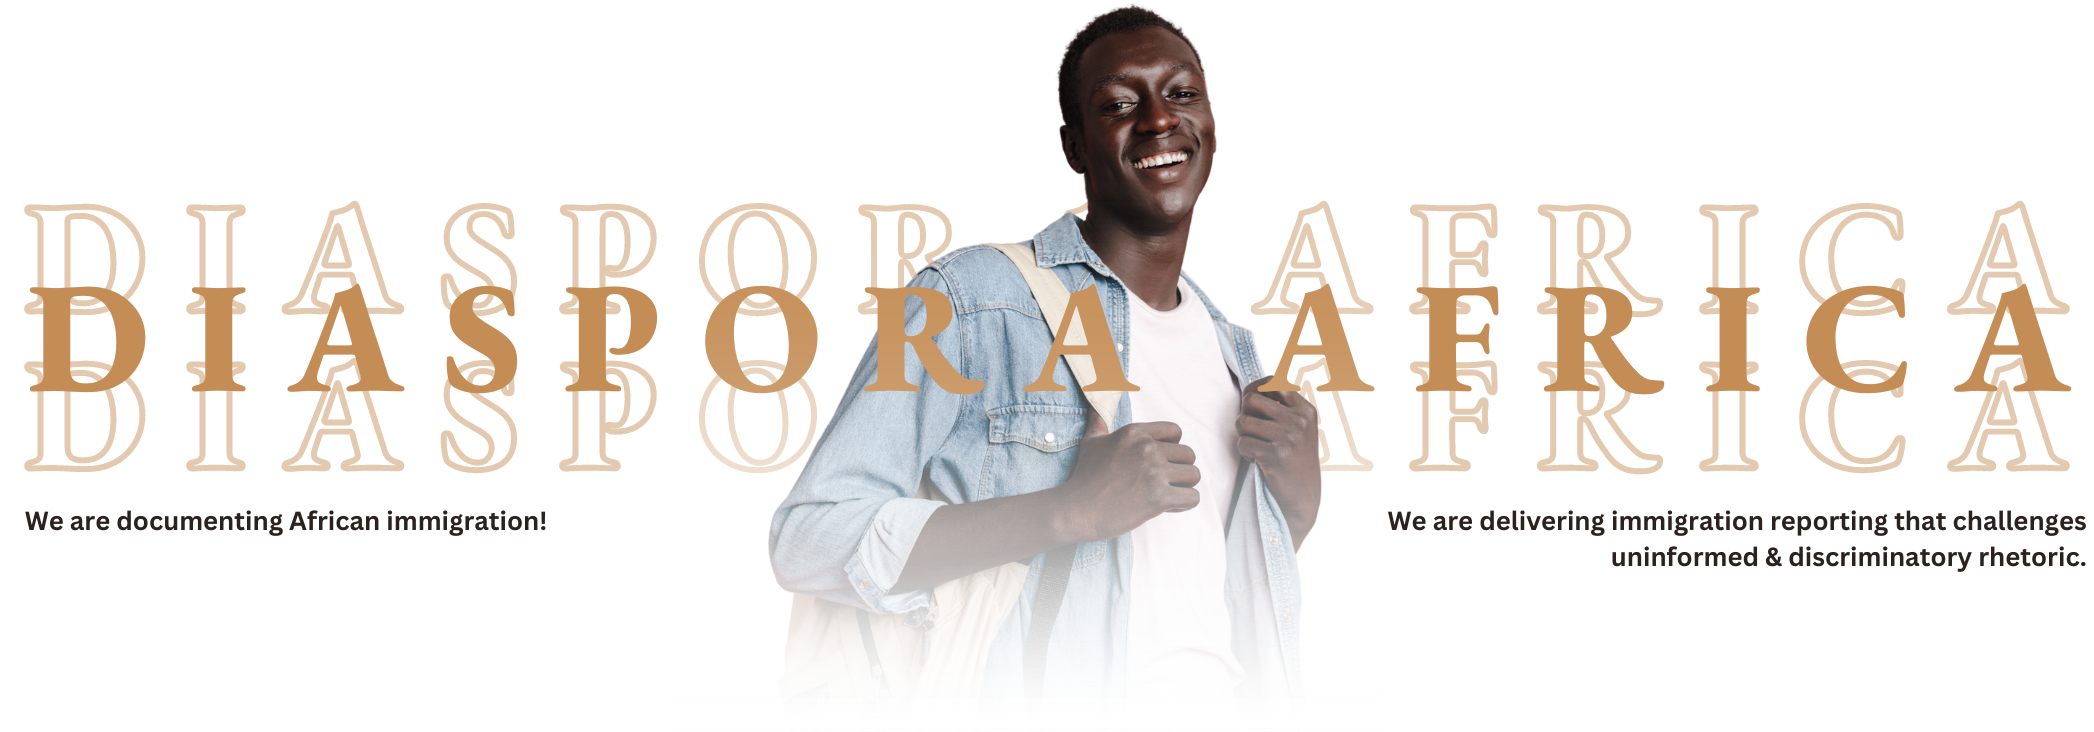 Diaspora Africa is a media platform dedicated to highlighting stories that centre Africans in Africa and in the diaspora, exploring the intersections between immigration and gender, education, climate change, refugee politics, LGBTQ+ rights and social inclusion.